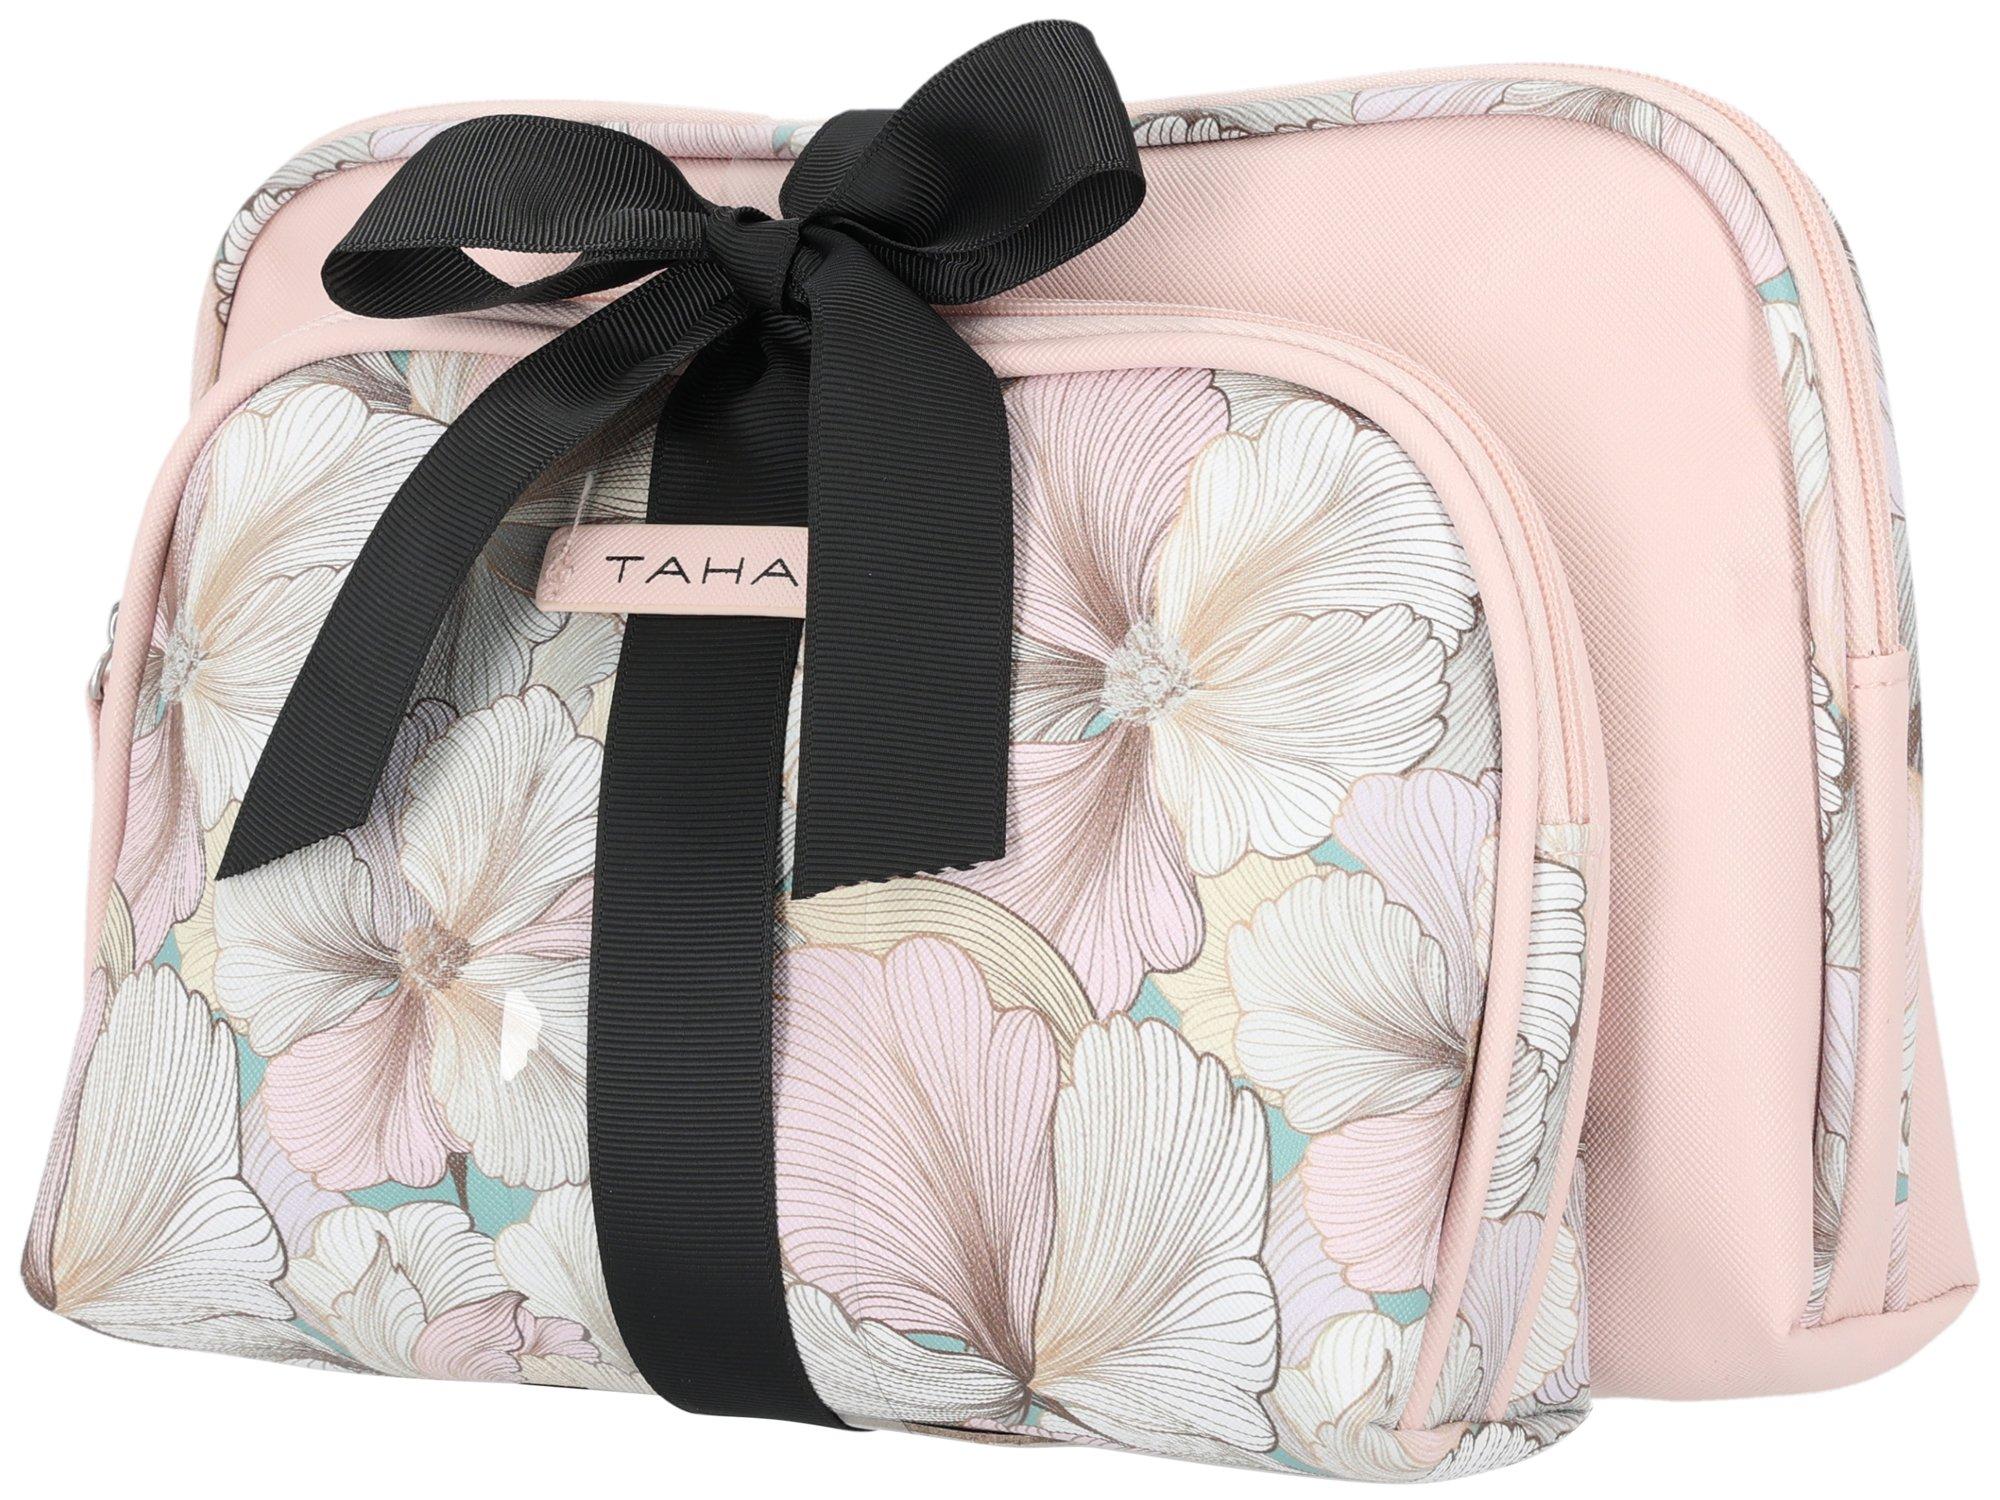 2 Pc. Floral & Solid Cosmetic Case Set